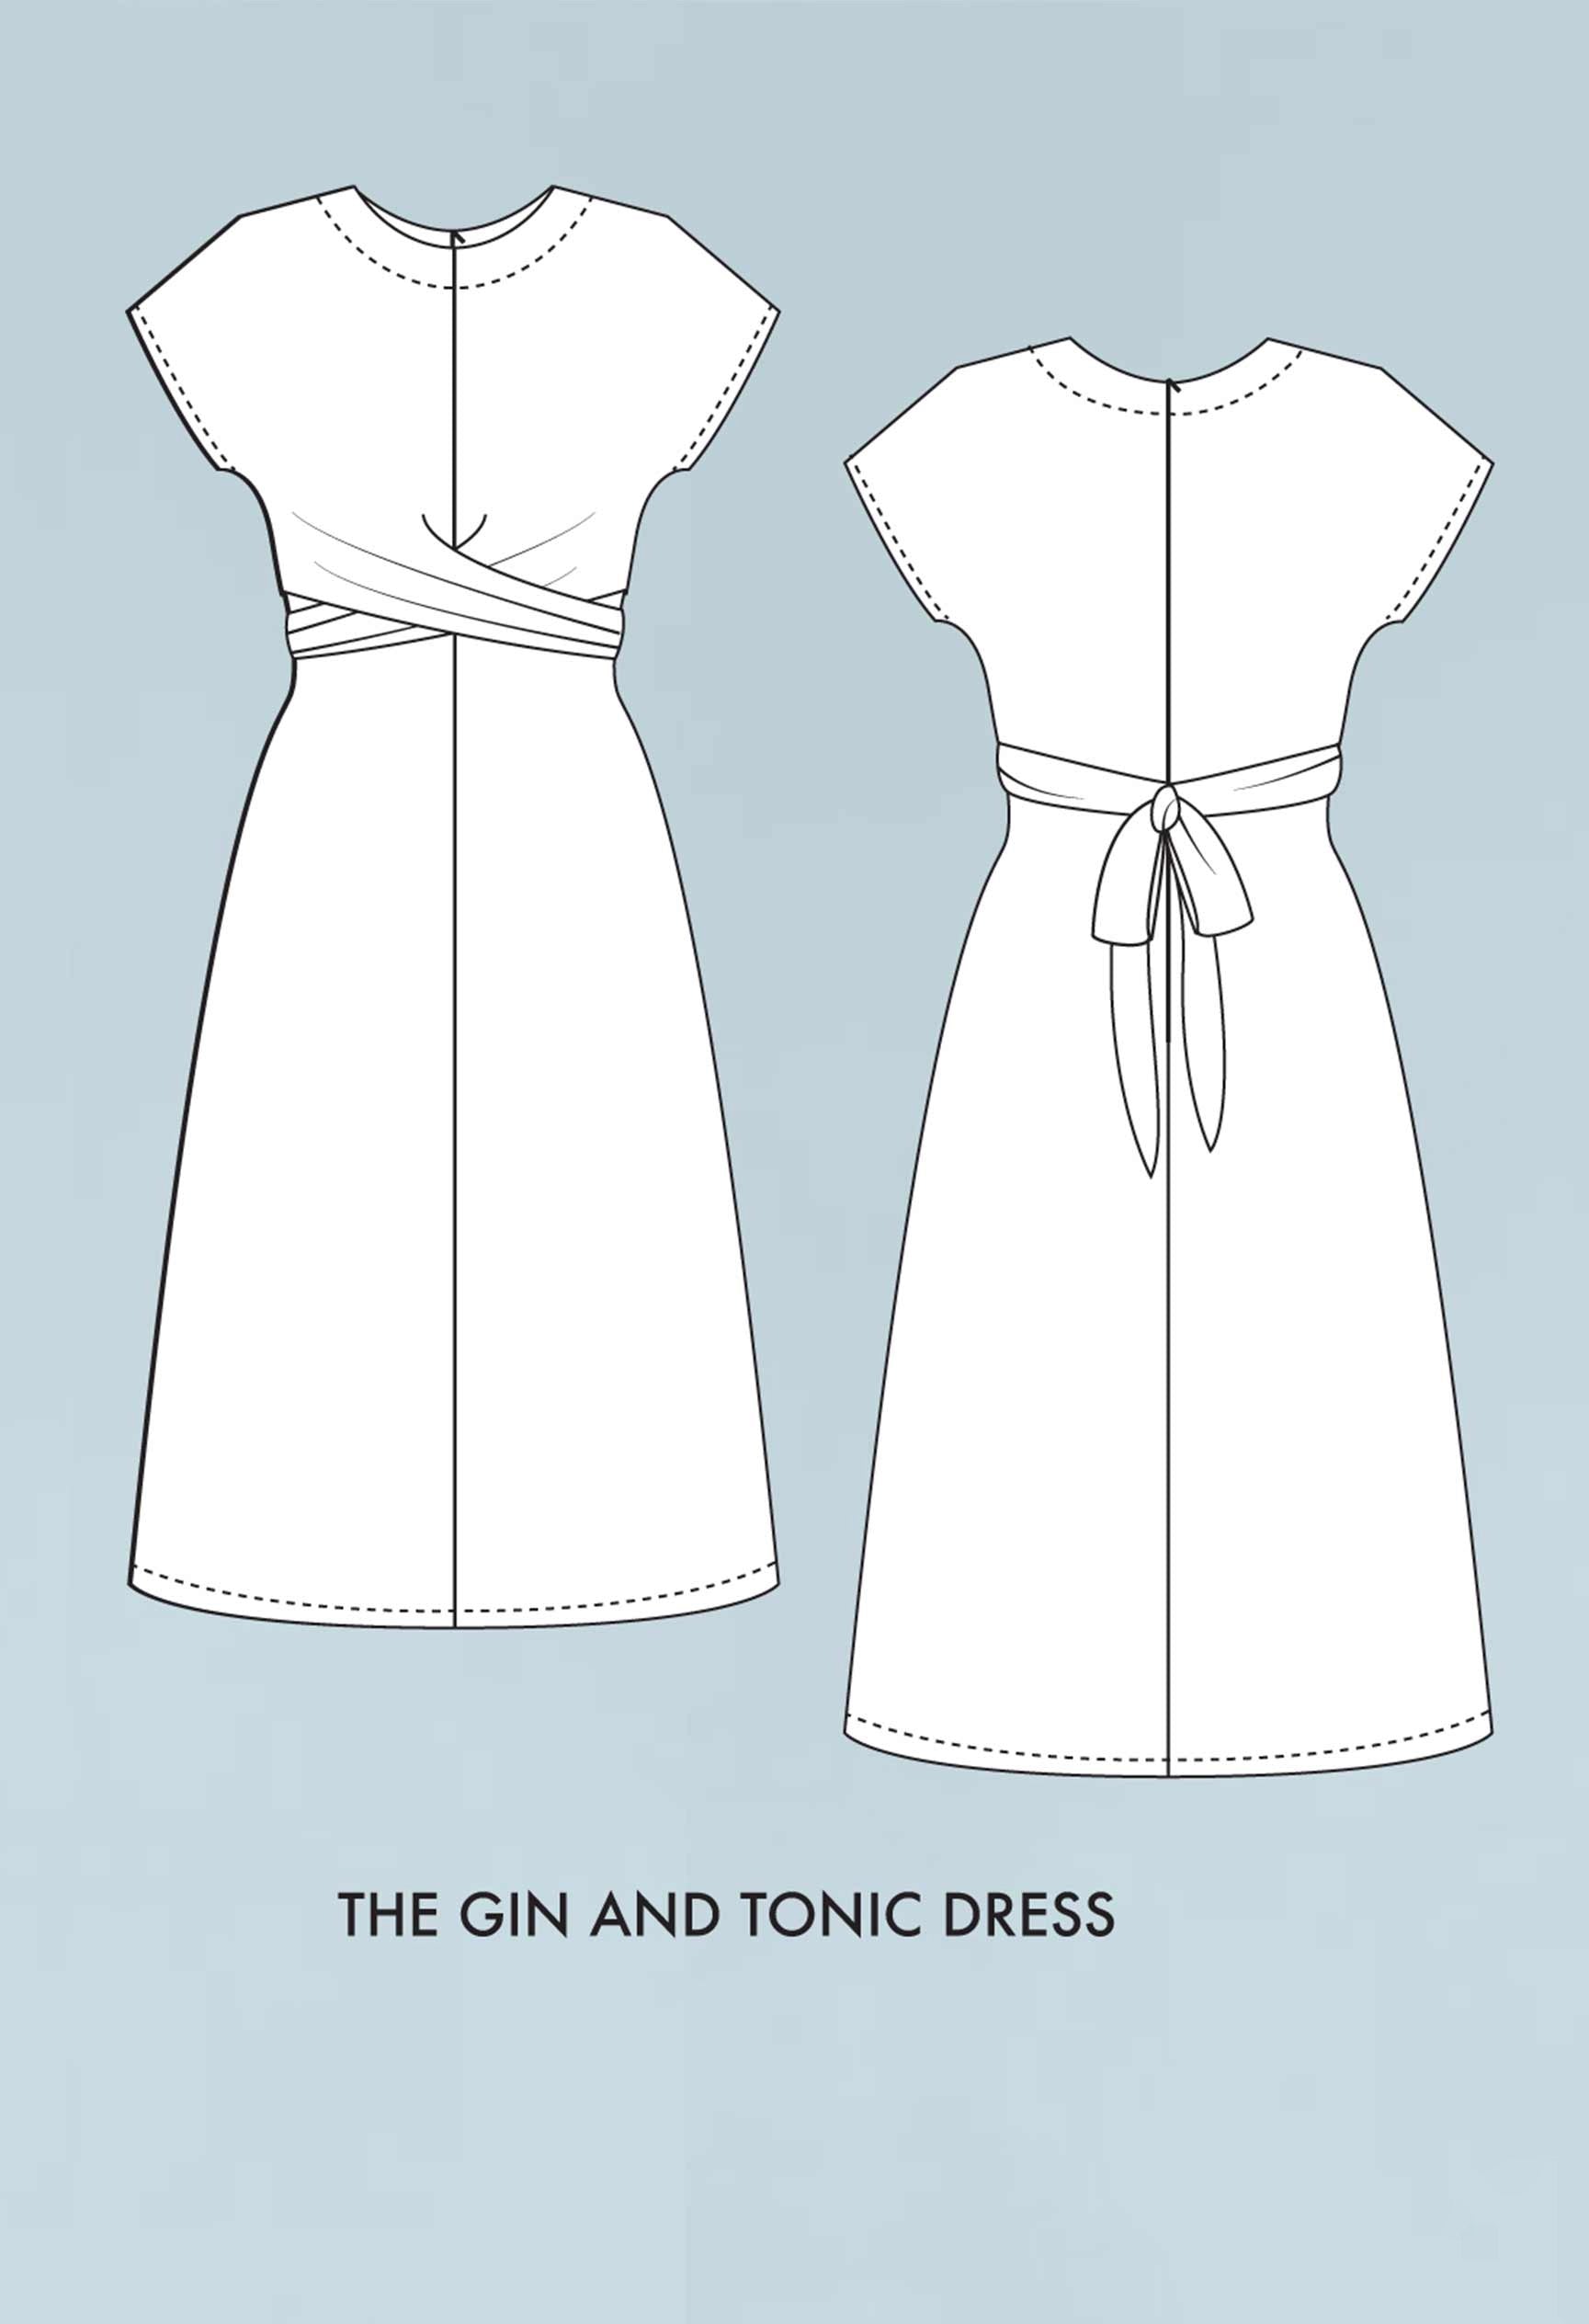 Our Lady of Leisure Gin and Tonic Dress